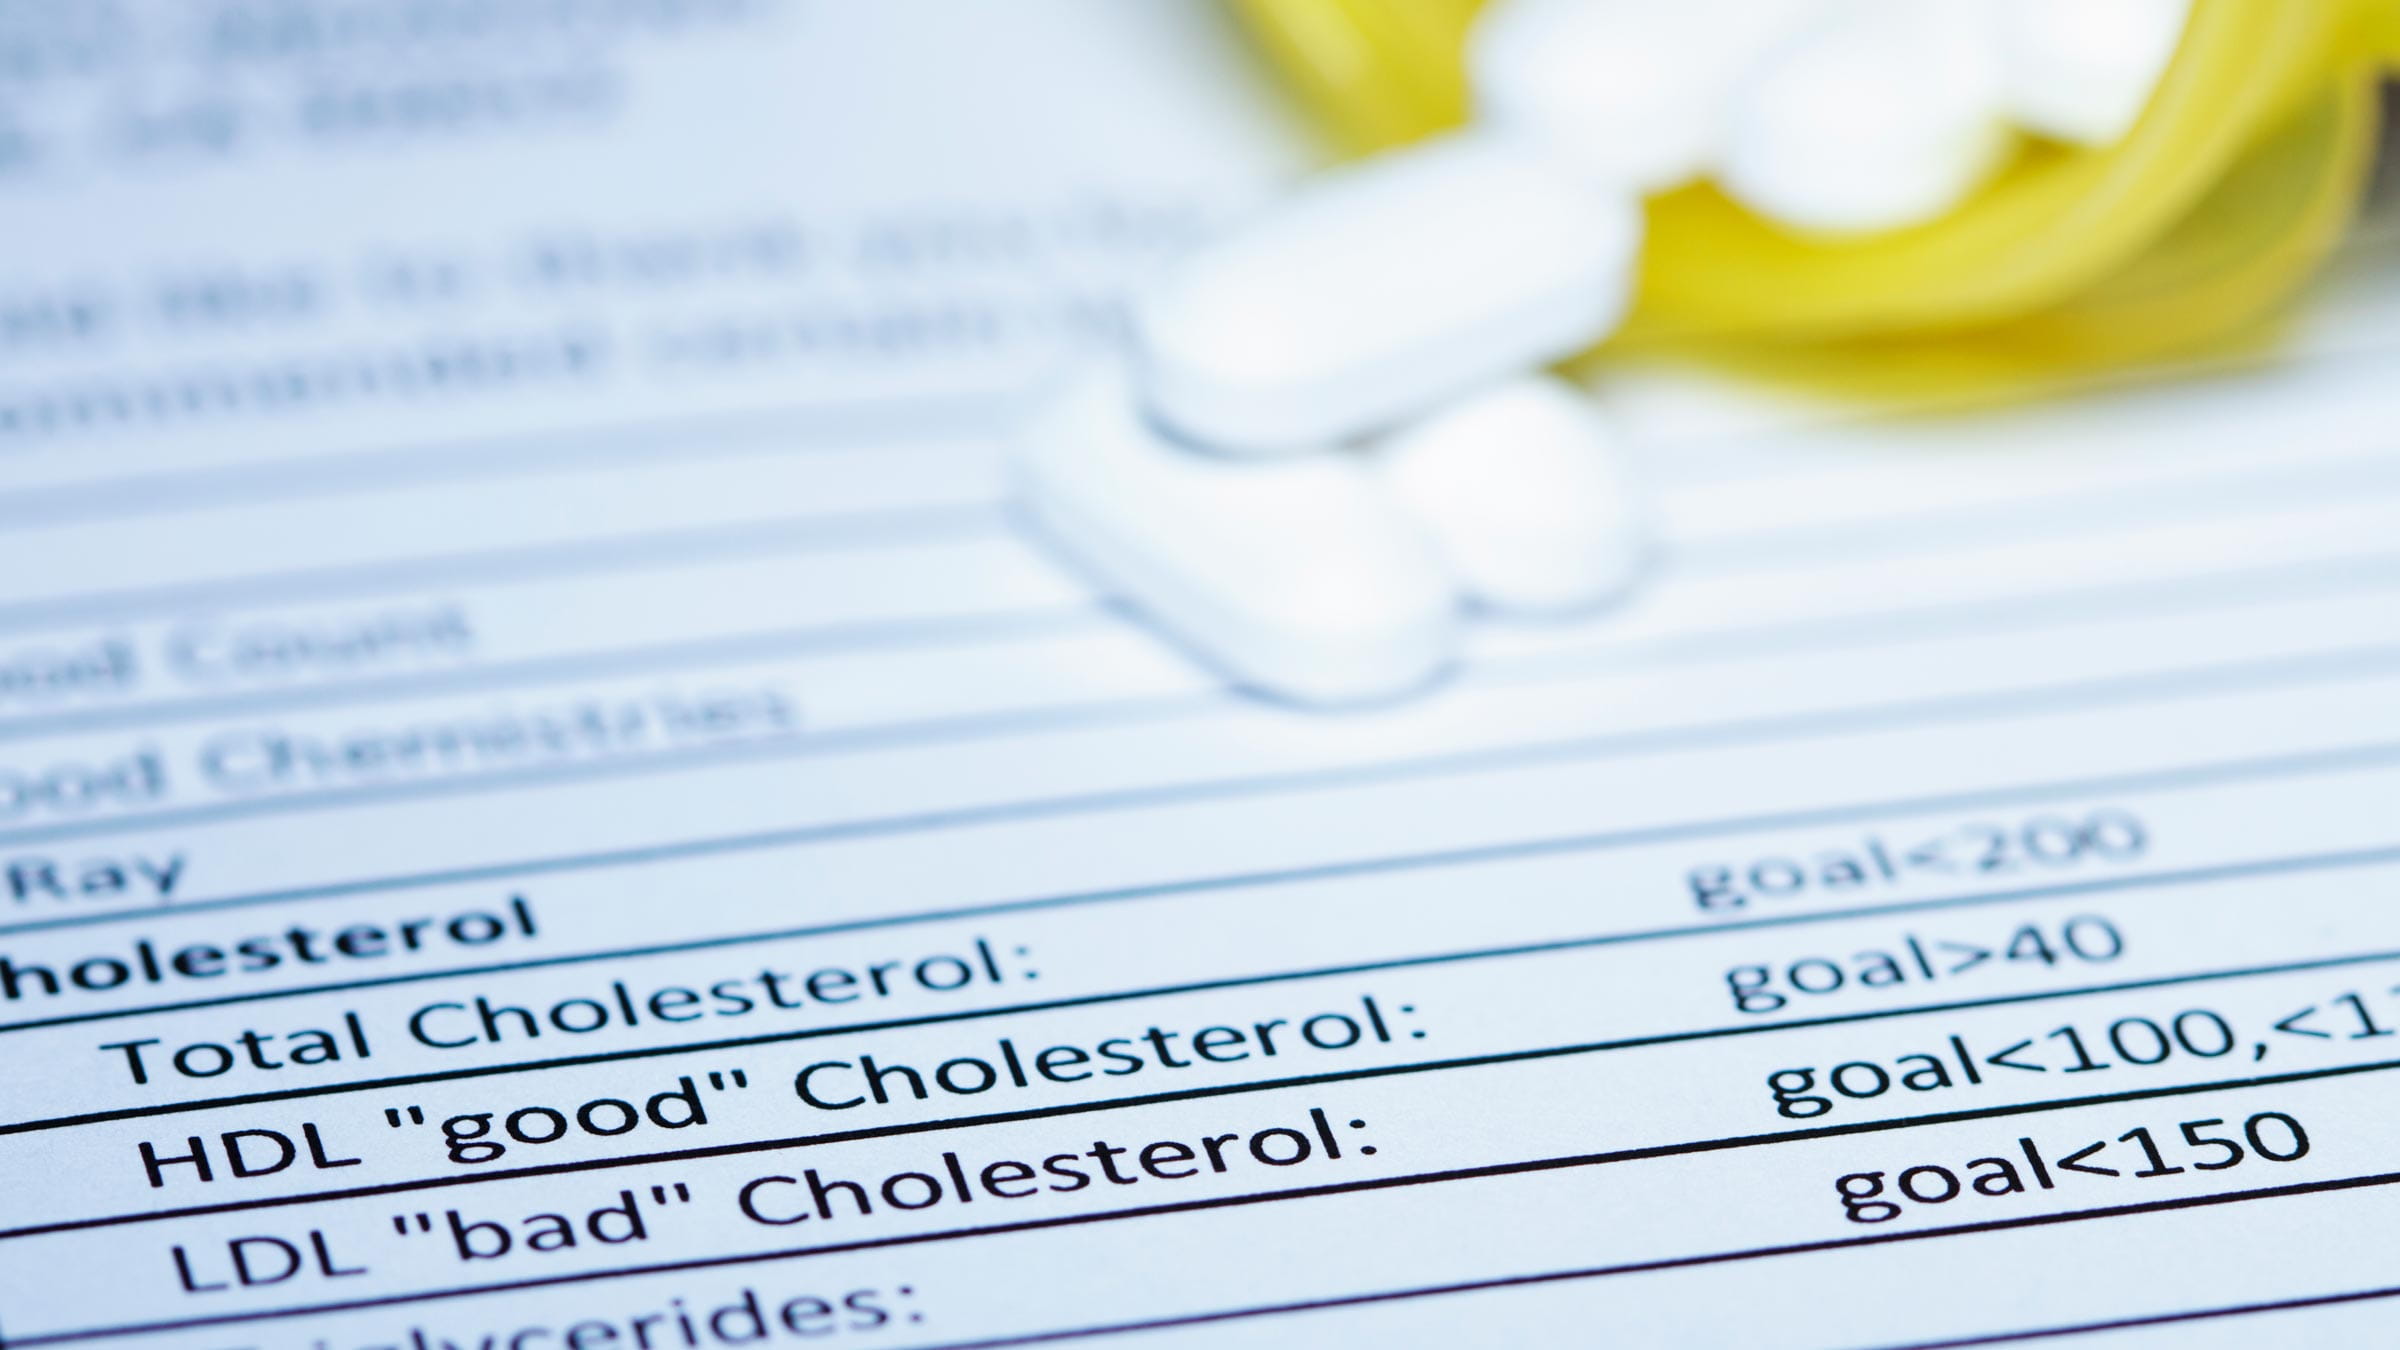 What’s more important: total cholesterol or cholesterol ratio?